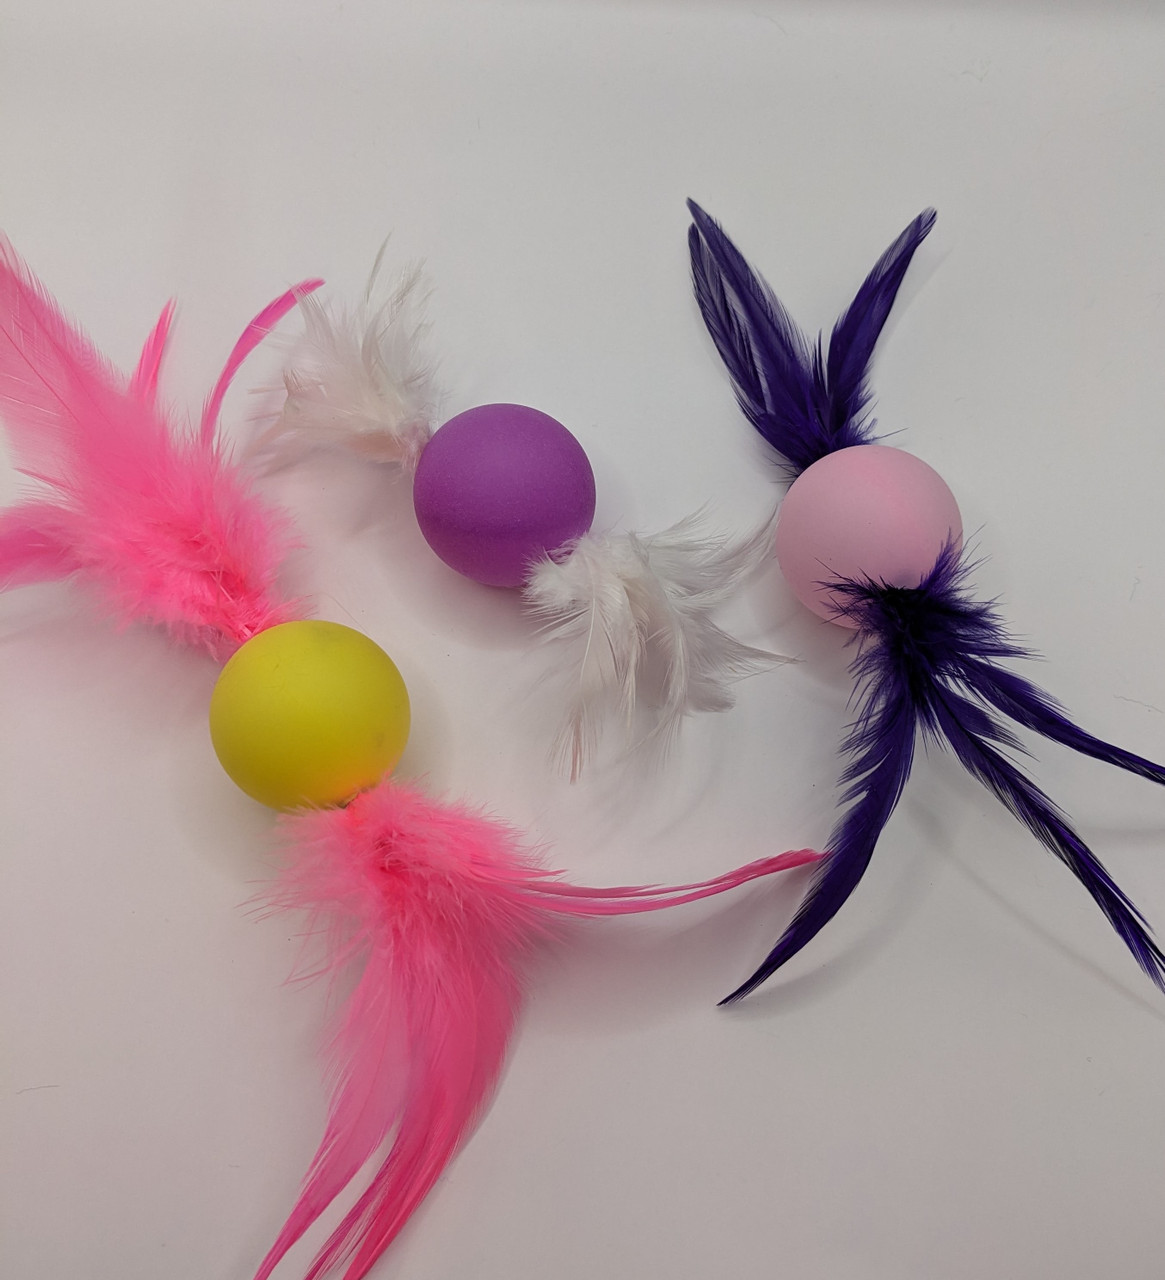 Colorful Rattle Balls with feathers! Just hours of play for your cat!